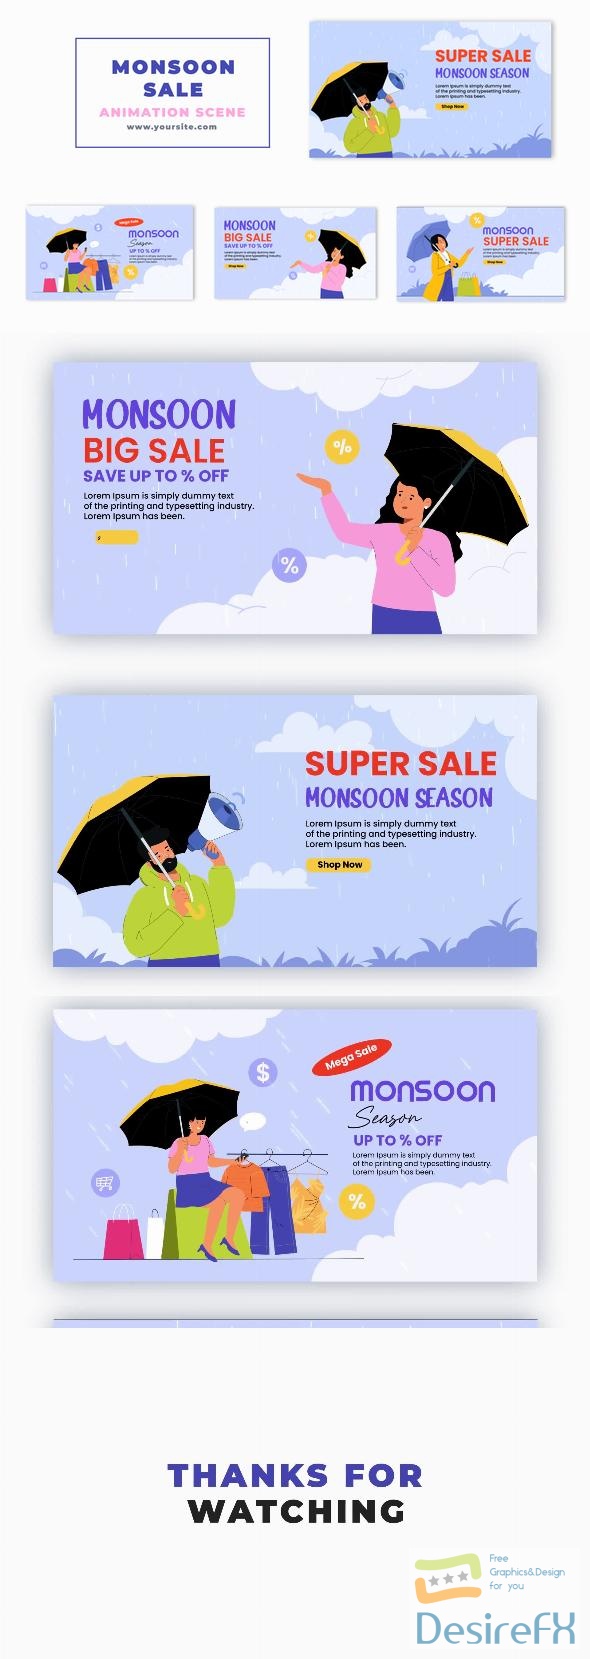 VideoHive Monsoon Sale Offer Flat Character Animation Scene 47276130